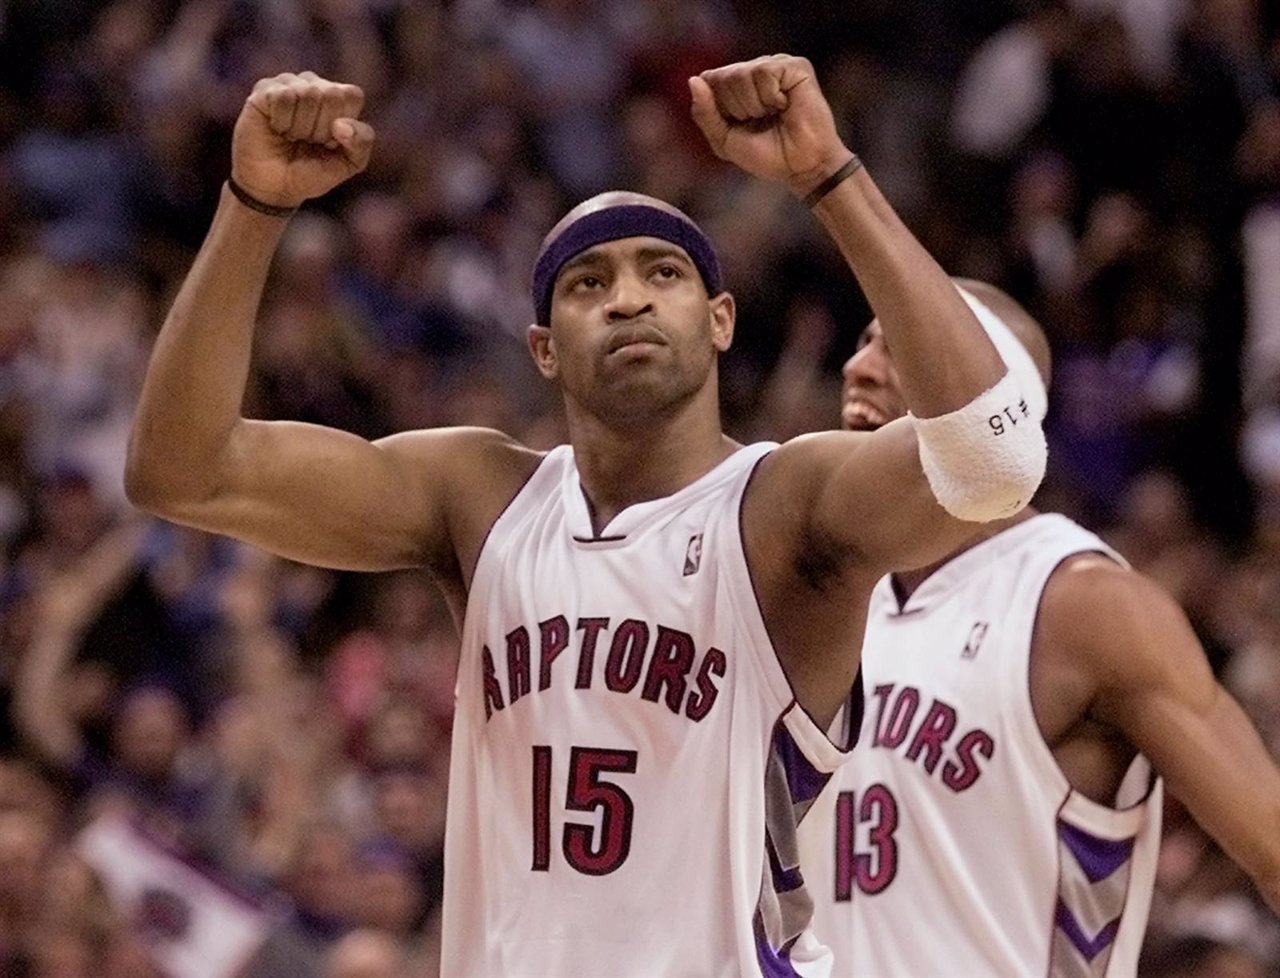 RAPTORS VINCE CARTER REACTS TO CROWD DURING NBA PLAYOFFS AGAINST 76ERS.